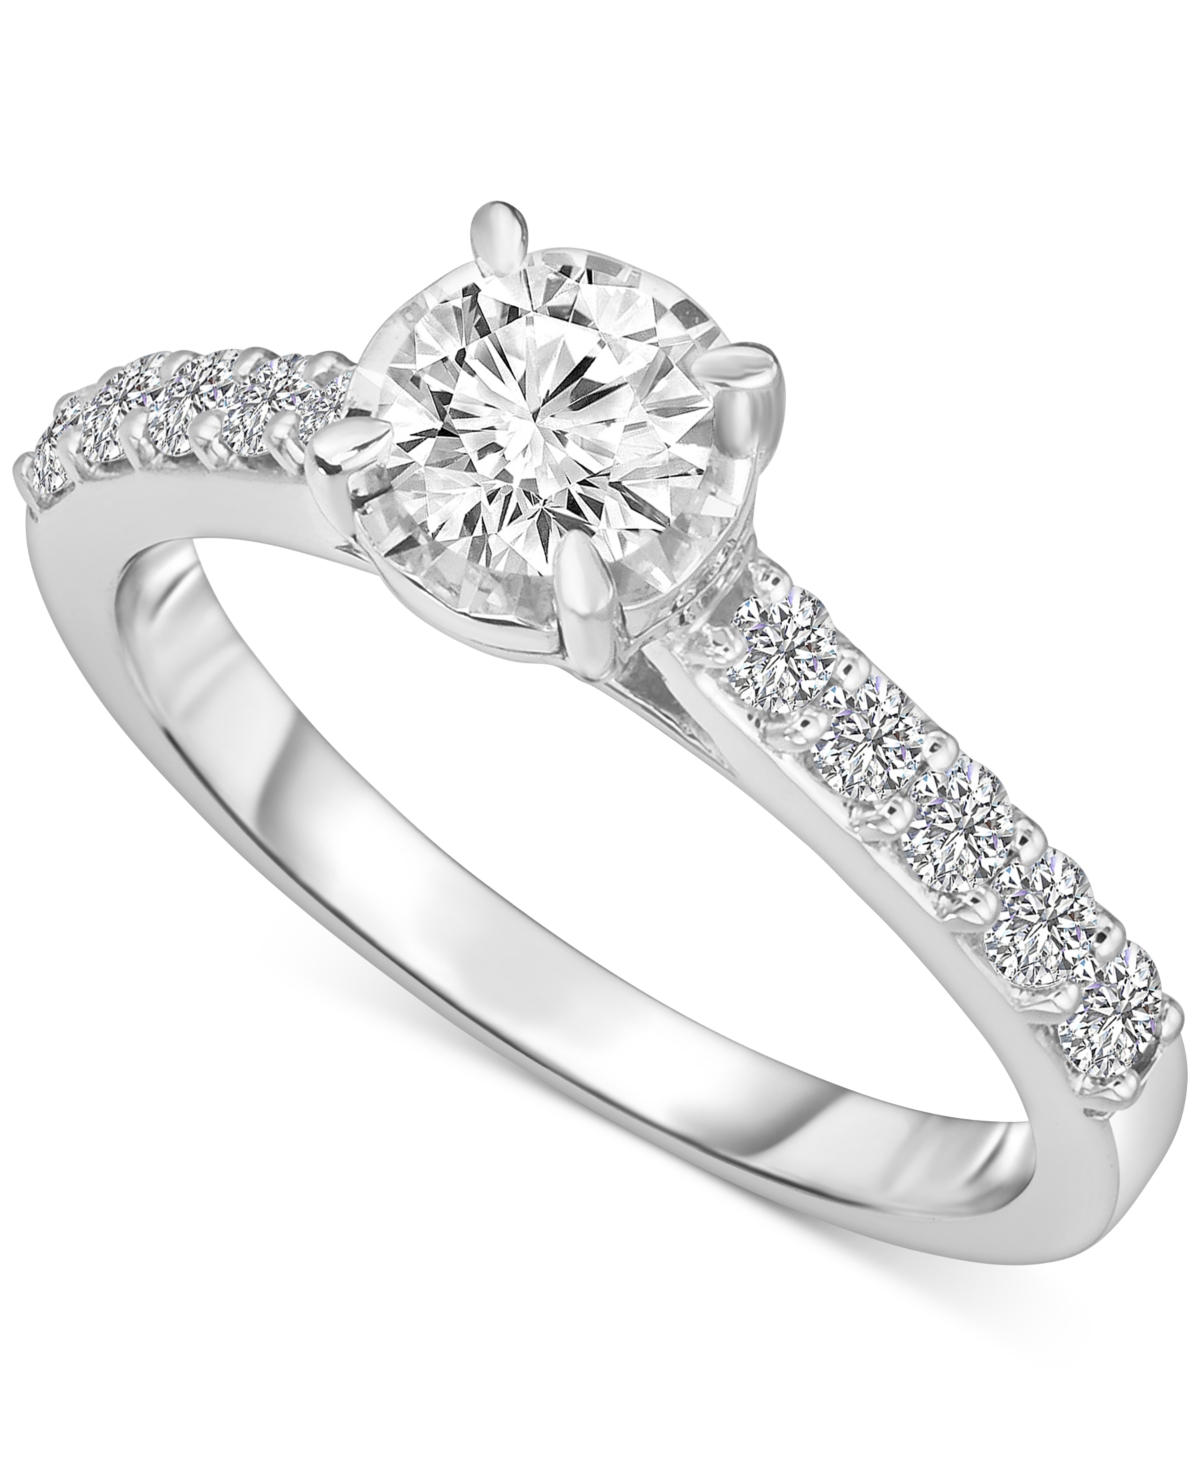 Diamond Solitaire Plus Engagement Ring (1 ct. t.w.) in 14k White Gold - White Gold